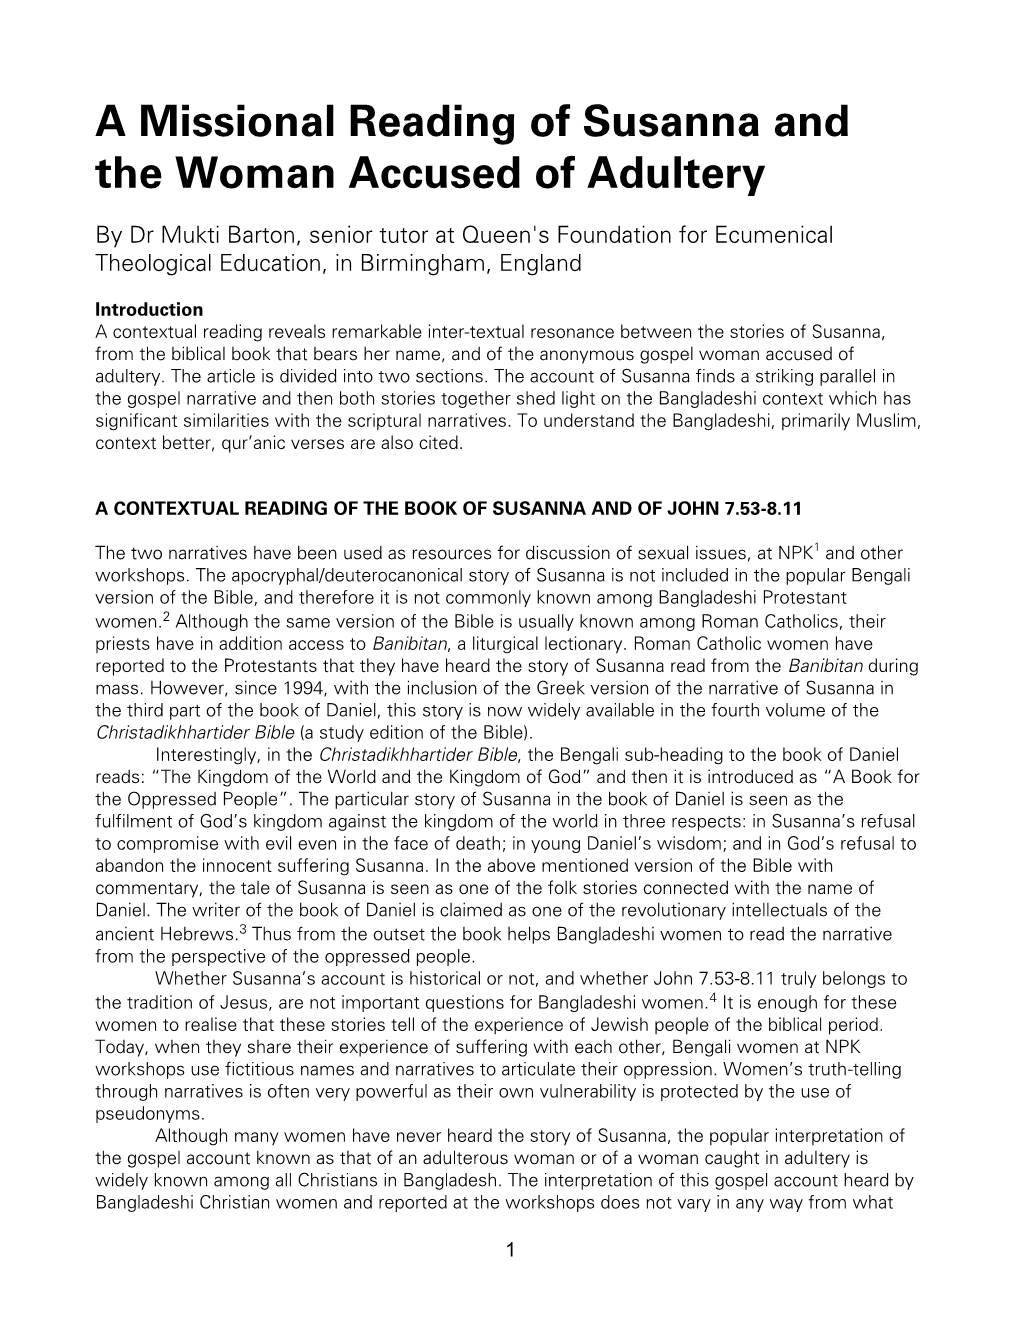 A Missional Reading of Susanna and the Woman Accused of Adultery